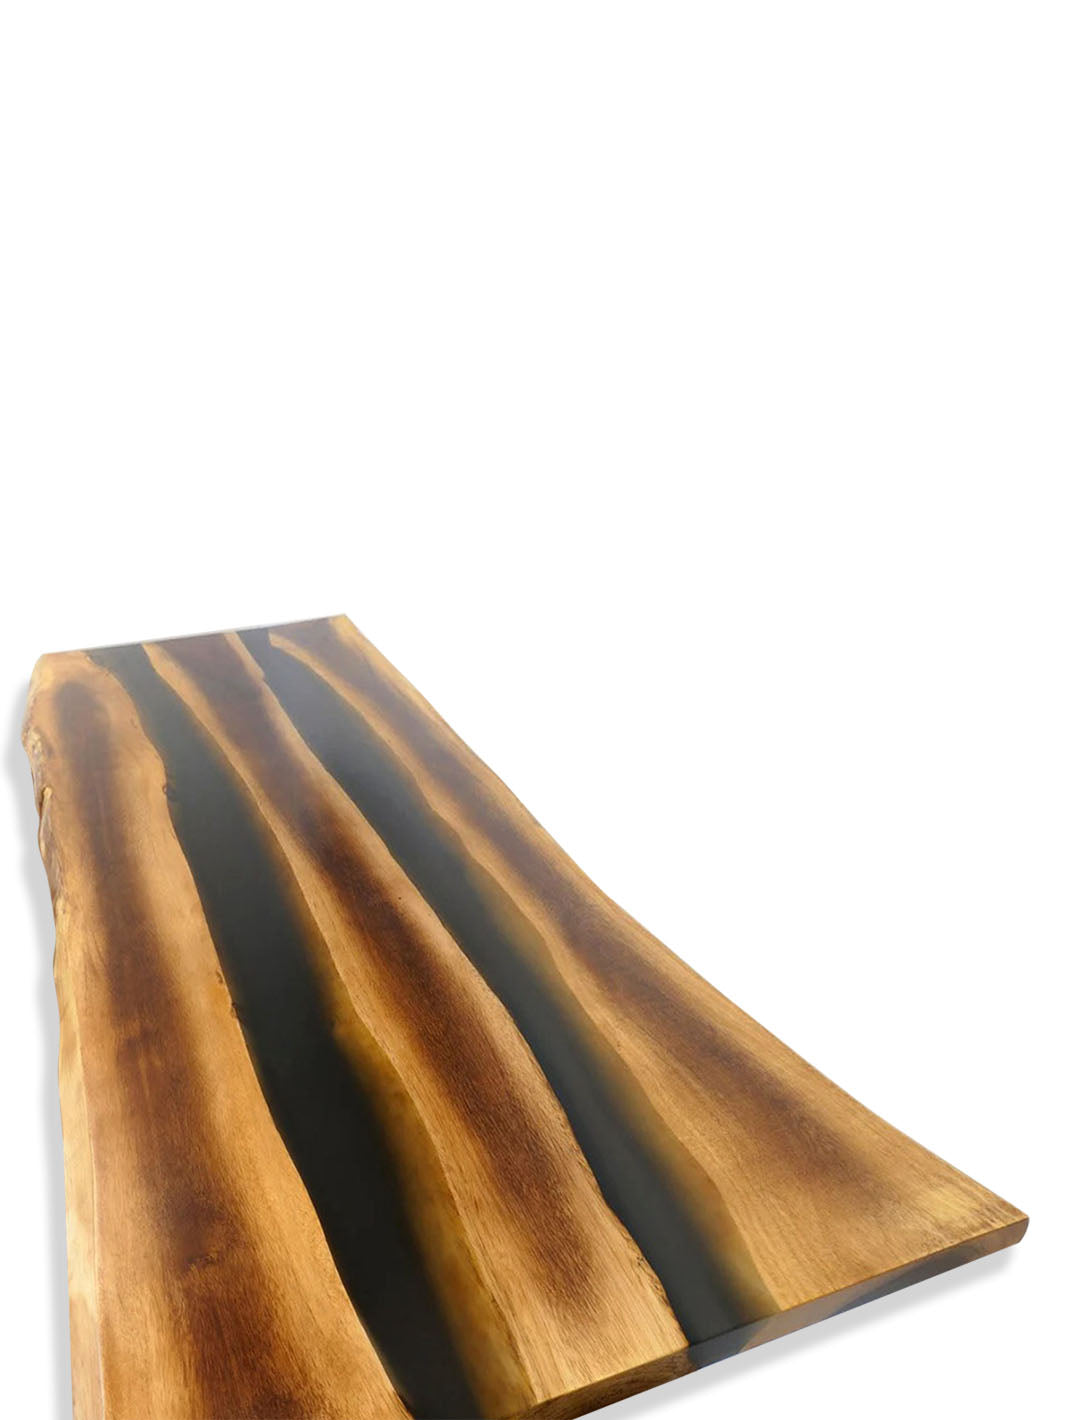 Rectangular Handcrafted Rosewood Slab Epoxy Resin Wooden Dining Table | 200x80cm Made 4 Decor Tables MDR0001-1